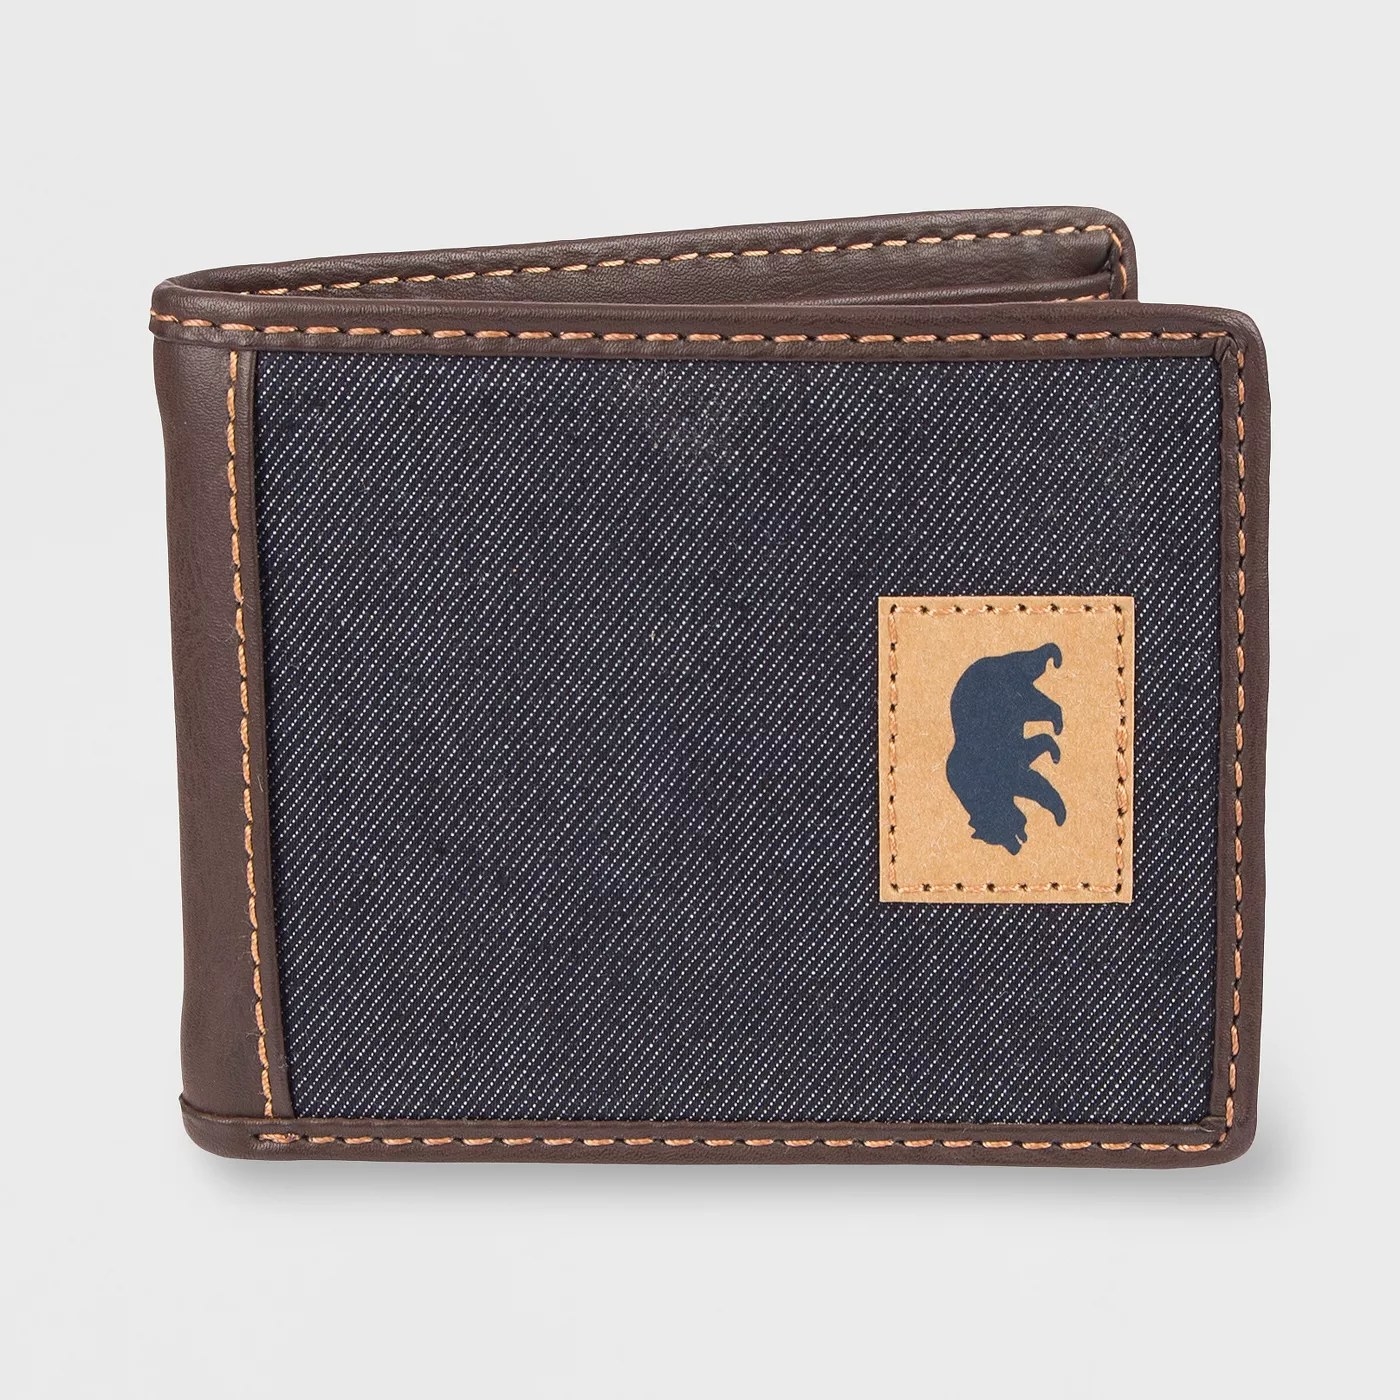 The denim wallet with brown leather trim and a leather bear accent